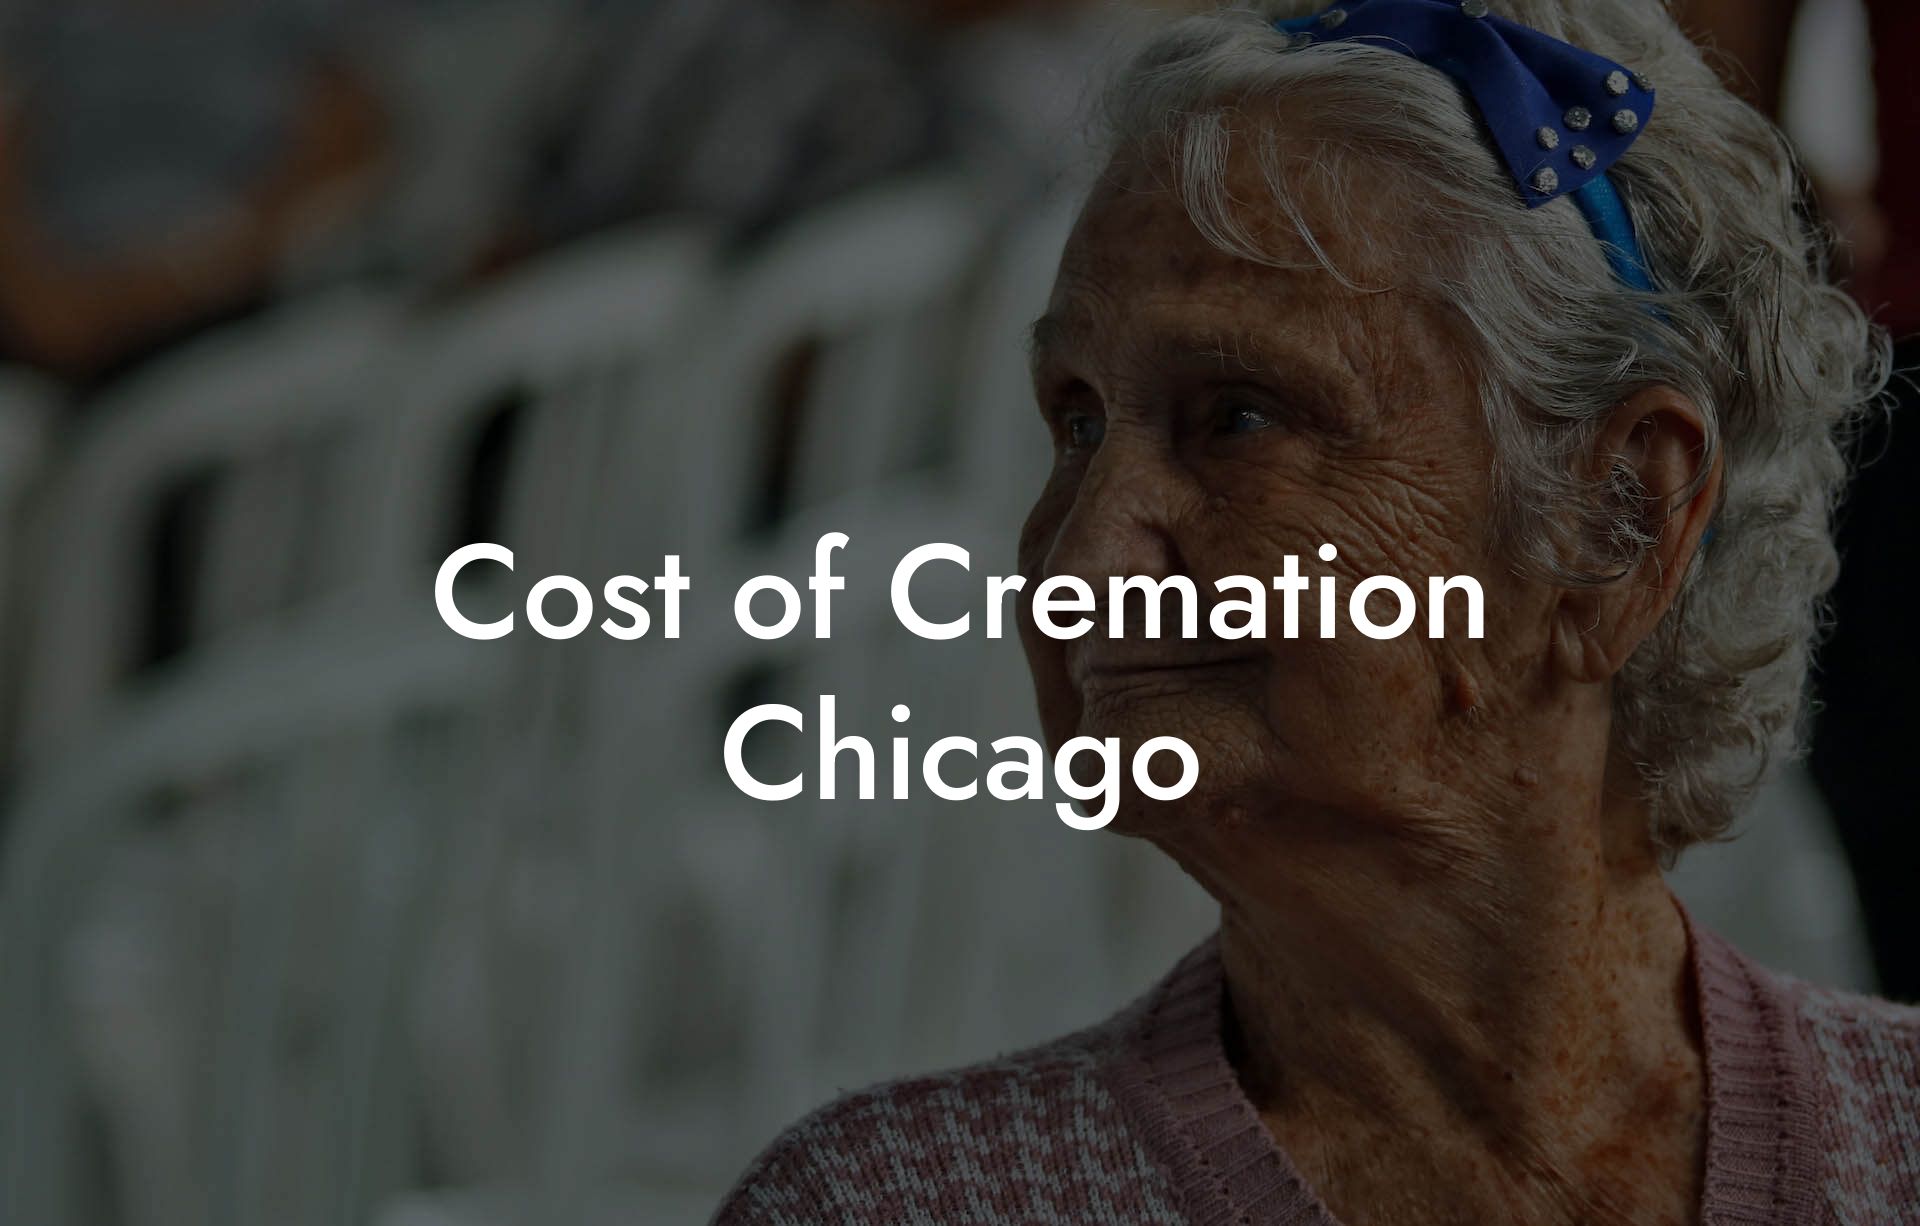 Cost of Cremation Chicago